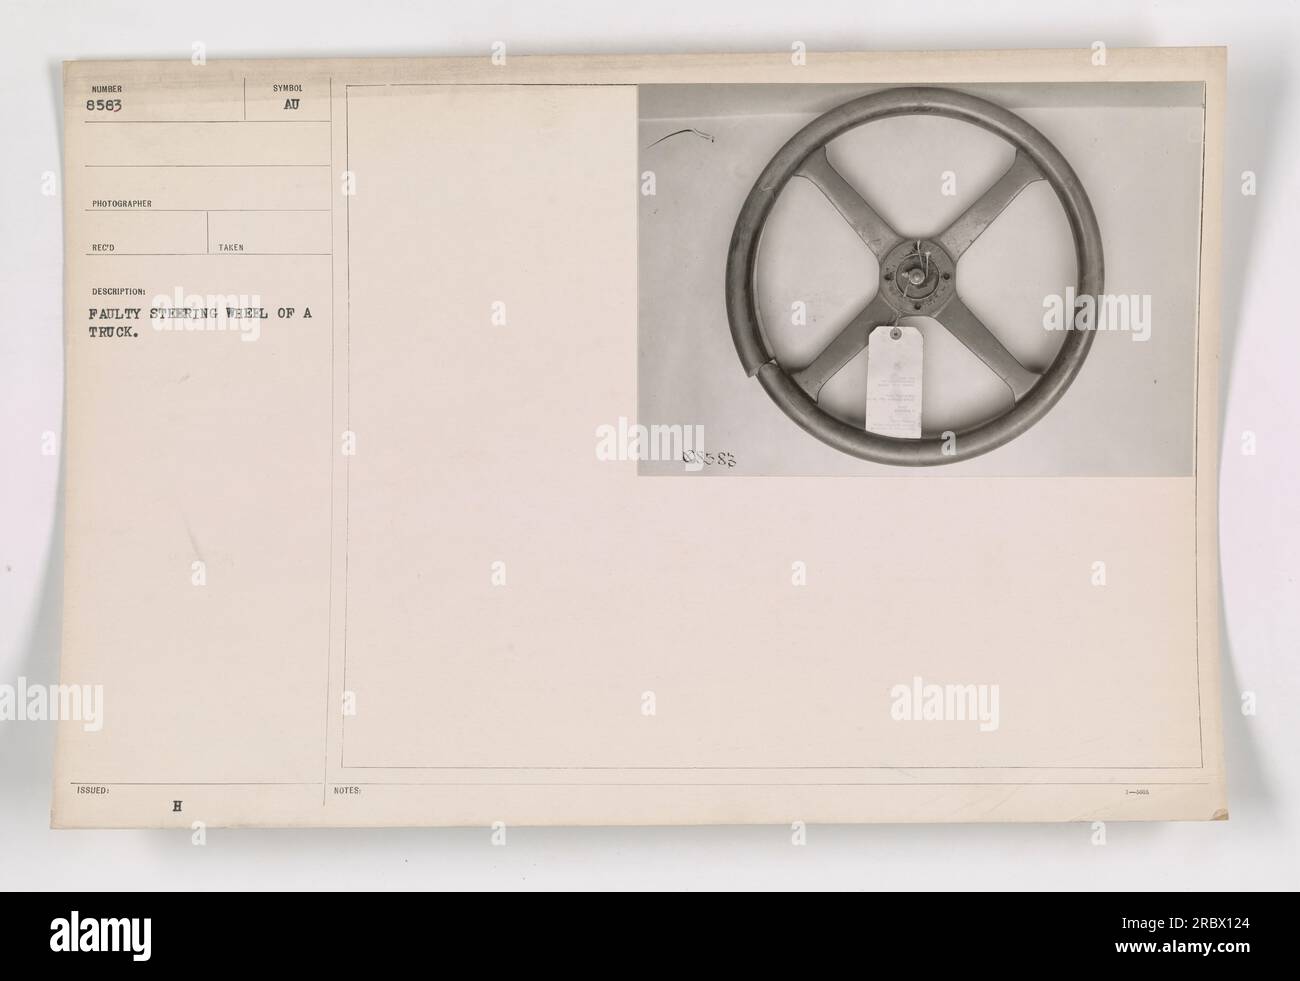 A photograph of a faulty steering wheel on a truck during World War I. The image, numbered 8563, was taken by an unidentified photographer and issued by REC. The truck appears to have a desorption problem with the steering wheel. Symbol notes indicate an 085-83 reference. Stock Photo